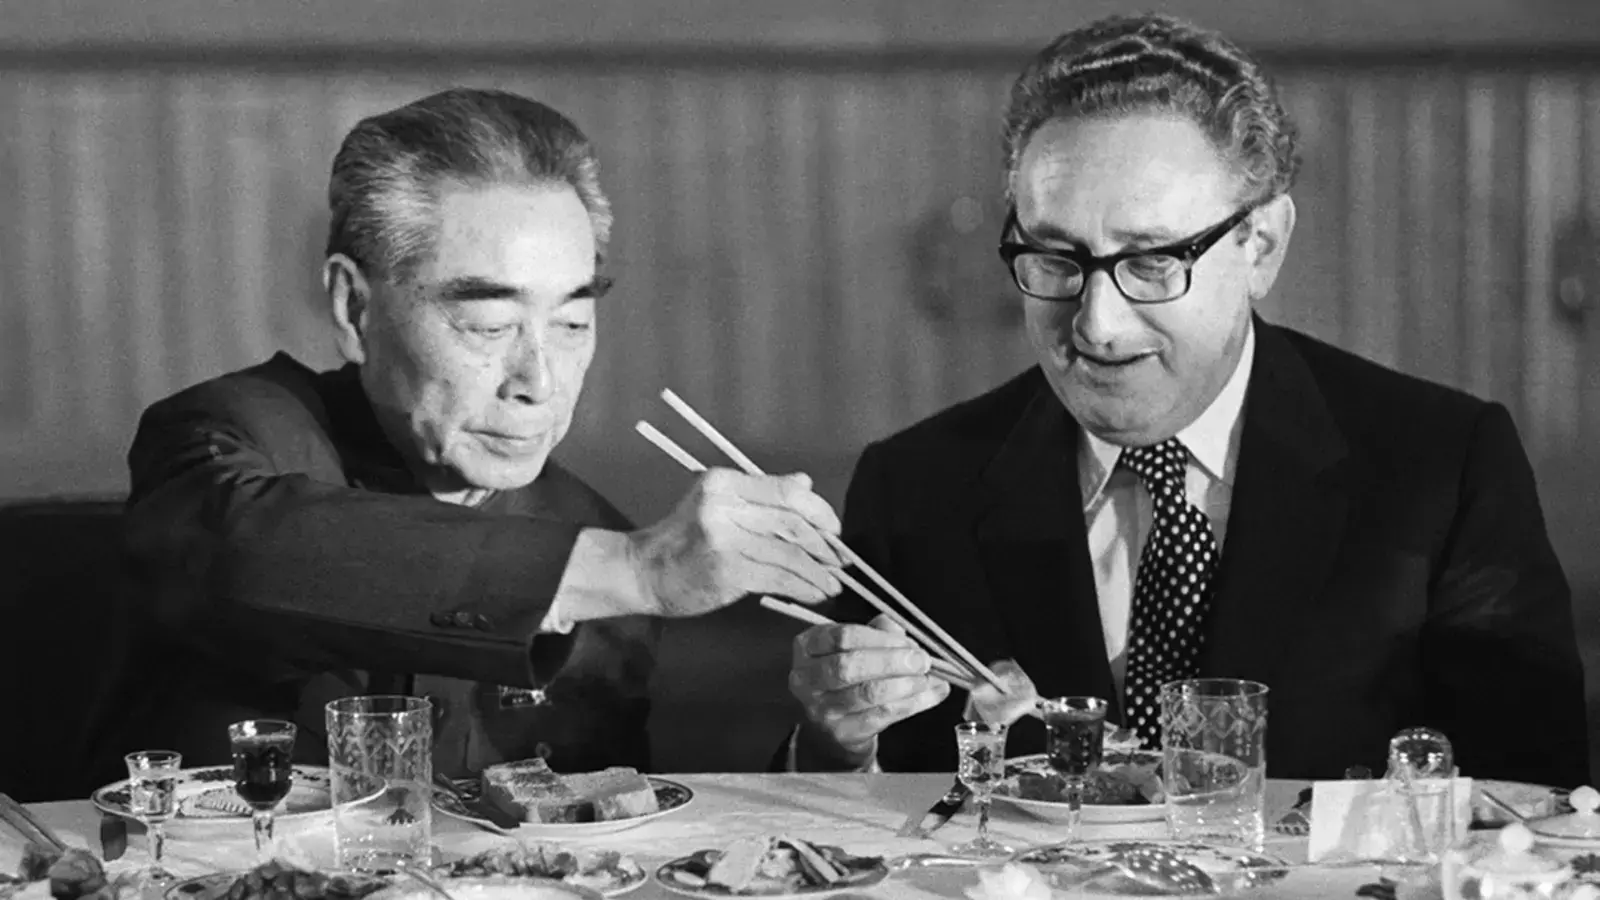 U.S. Secretary of State Henry Kissinger accepts food from Chinese Premier Zhou Enlai during a state banquet in the Great Hall of the People in Beijing in 1973.